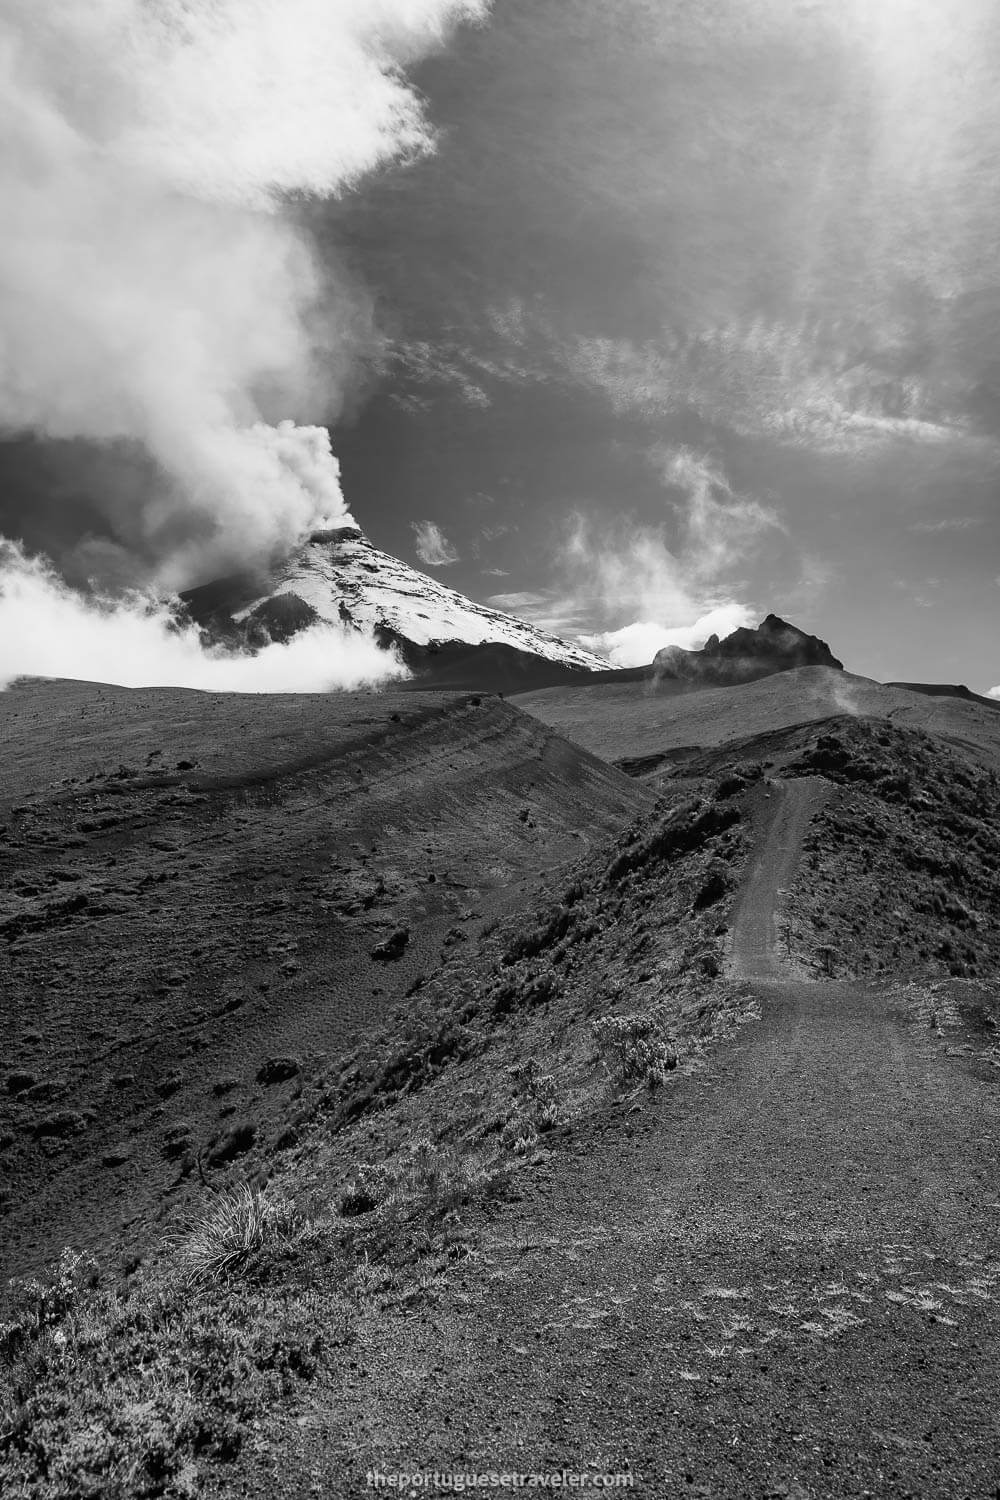 A BW shot of Cotopaxi on the Morurco 360 hike